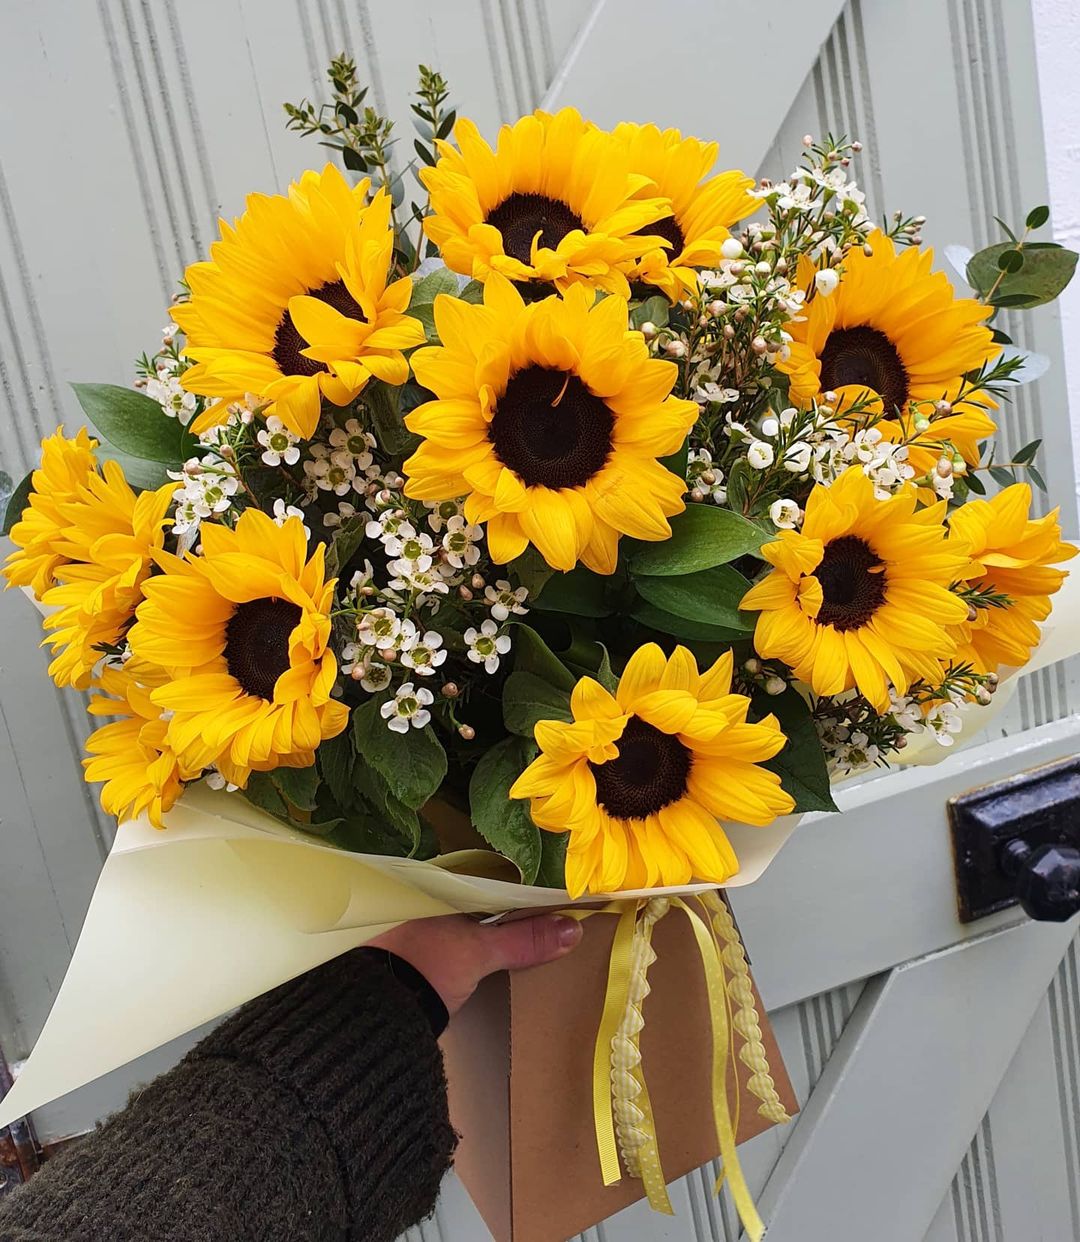 Helianthus Season - Everything You Need to Know About Sunflowers016